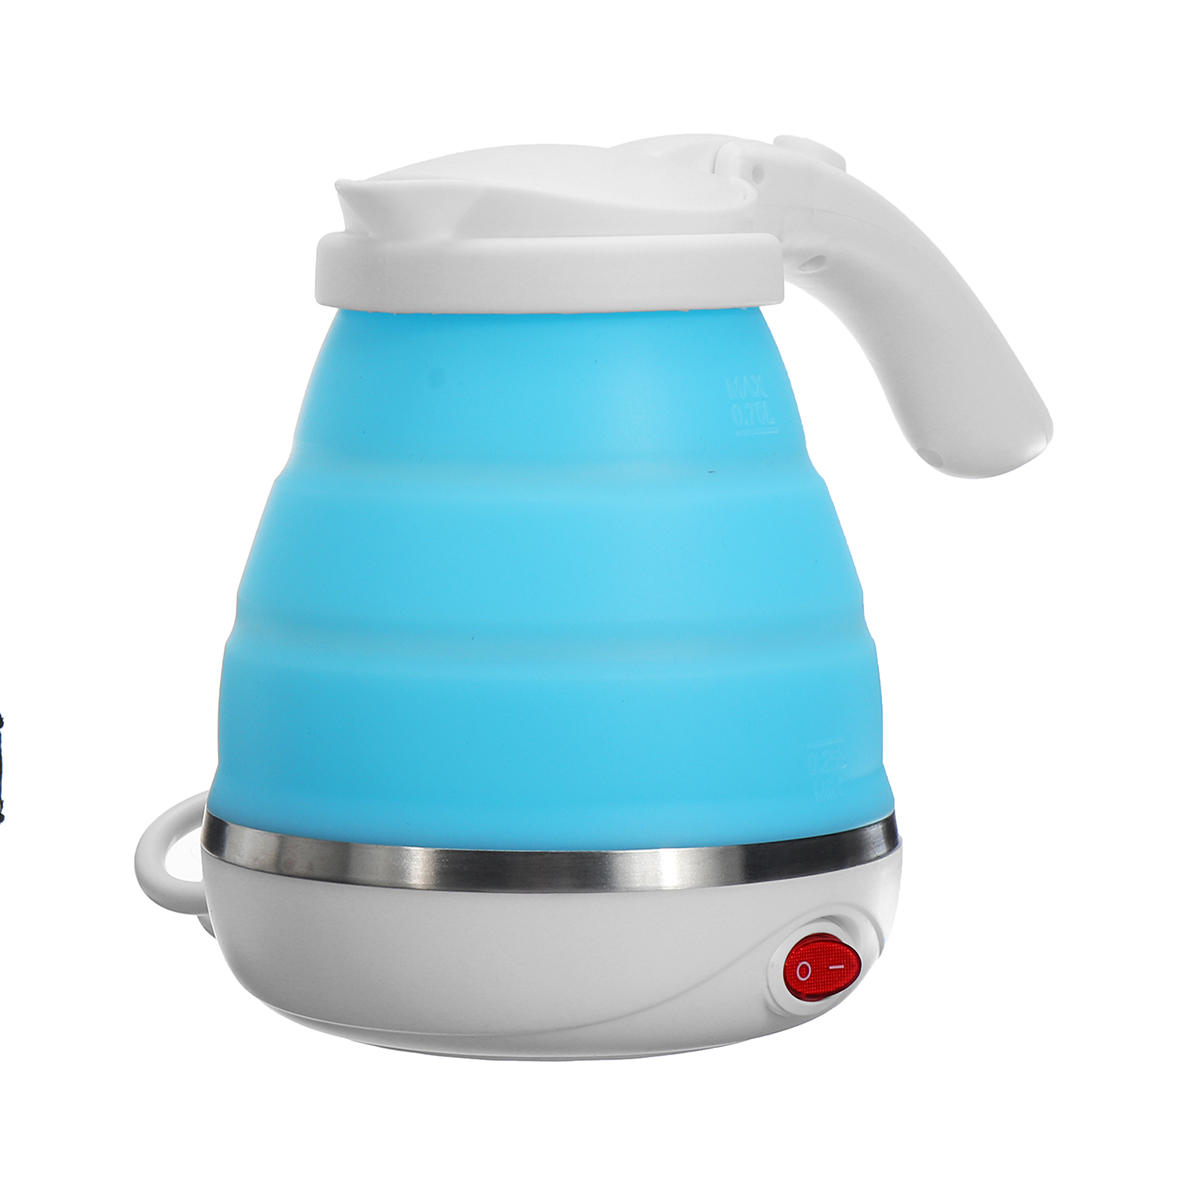 SE Collapsible Silicone Kettle